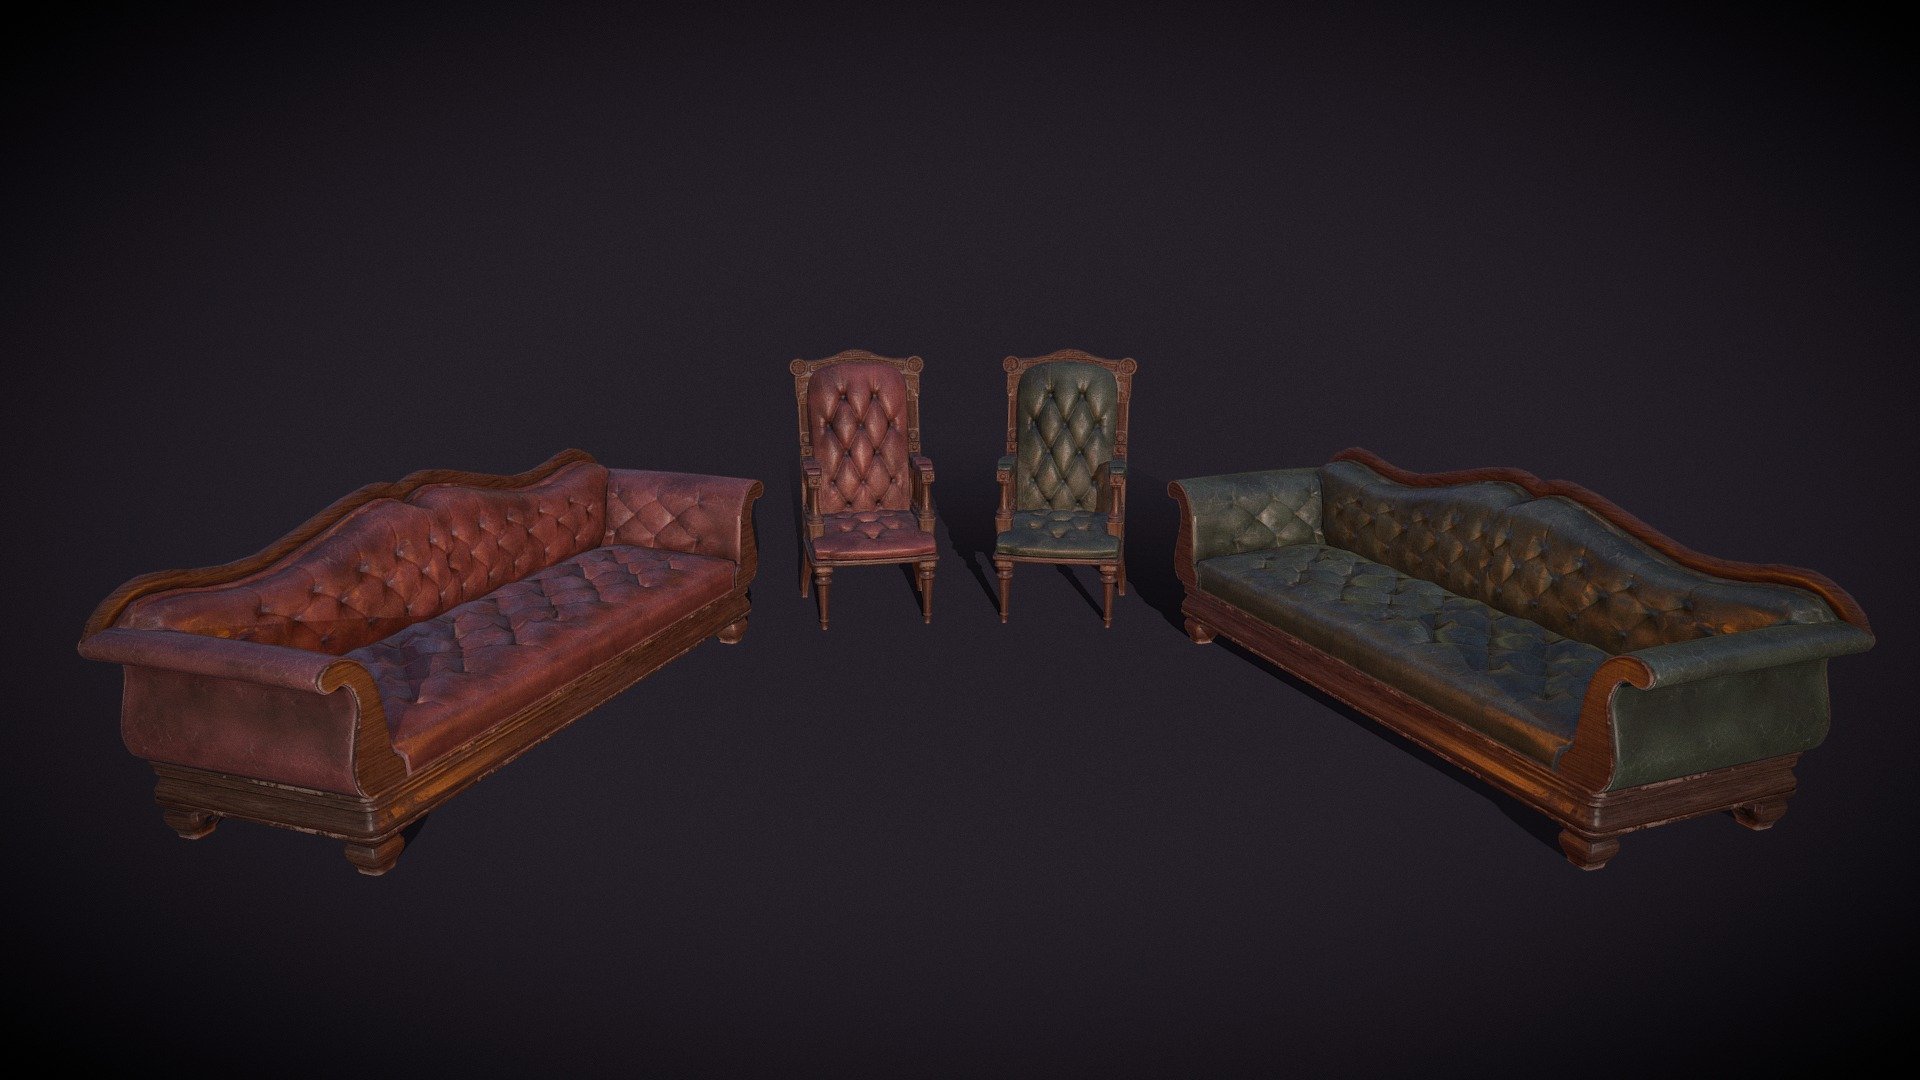 A pack with my victorian styled sofa and chairs. Both have 2k textures and a bonus lead green texture! 

Updated 4k textures and other props will be added in the future 3d model